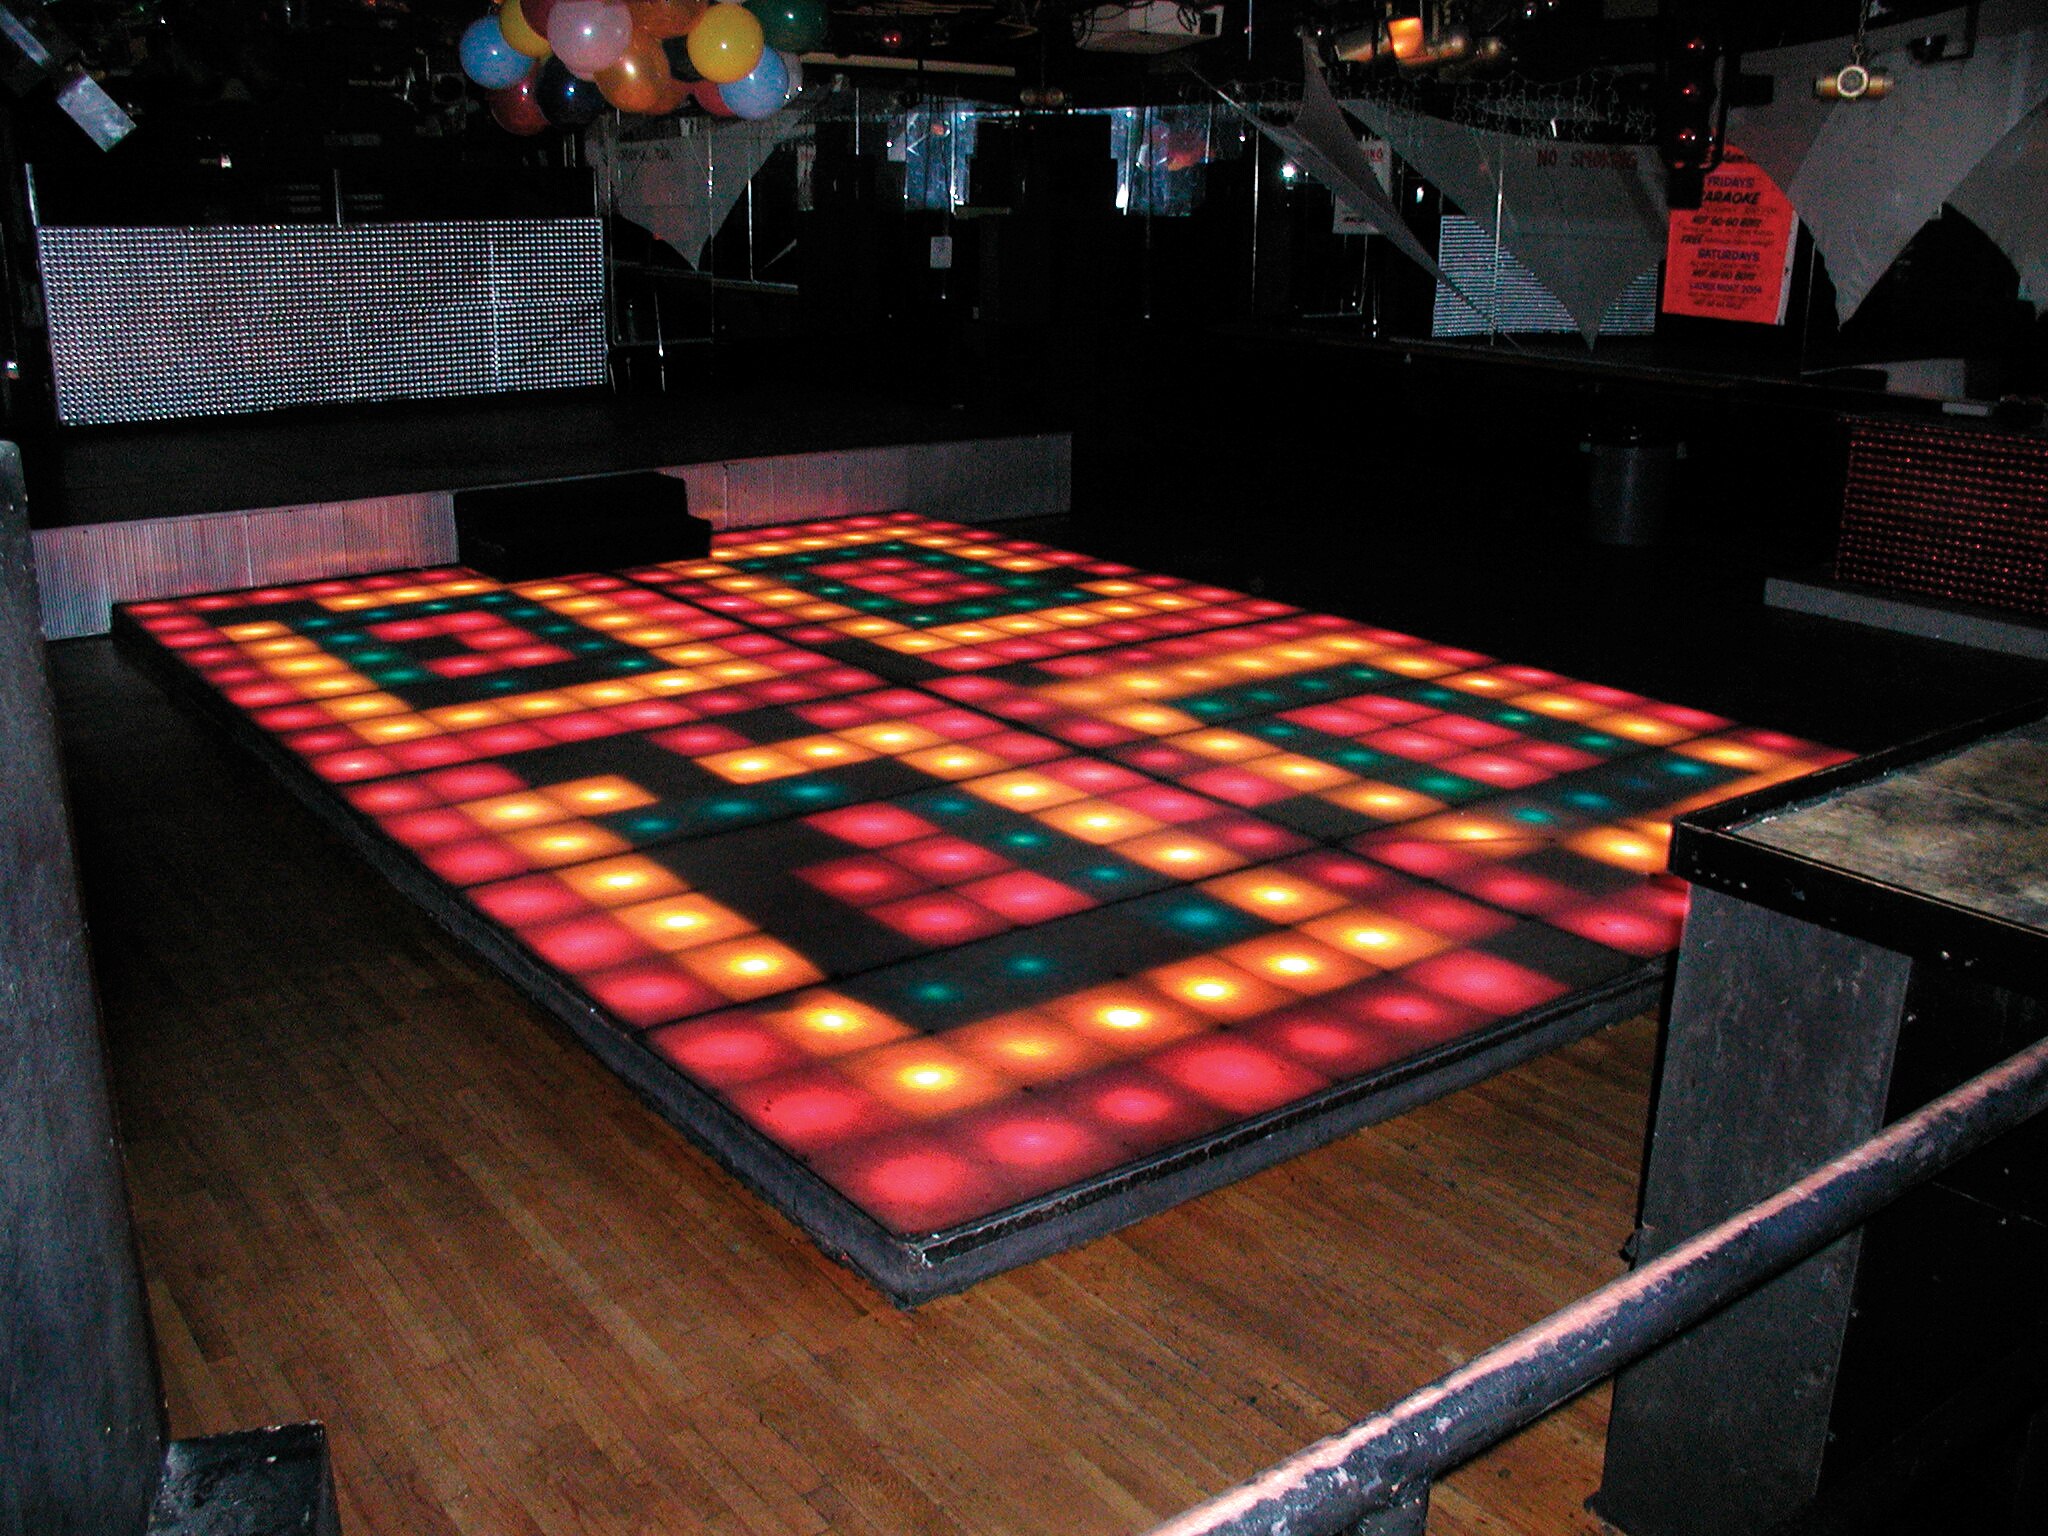 You Could Be Dancing. on 'Saturday Night Fever' Disco Floor. Voice of America